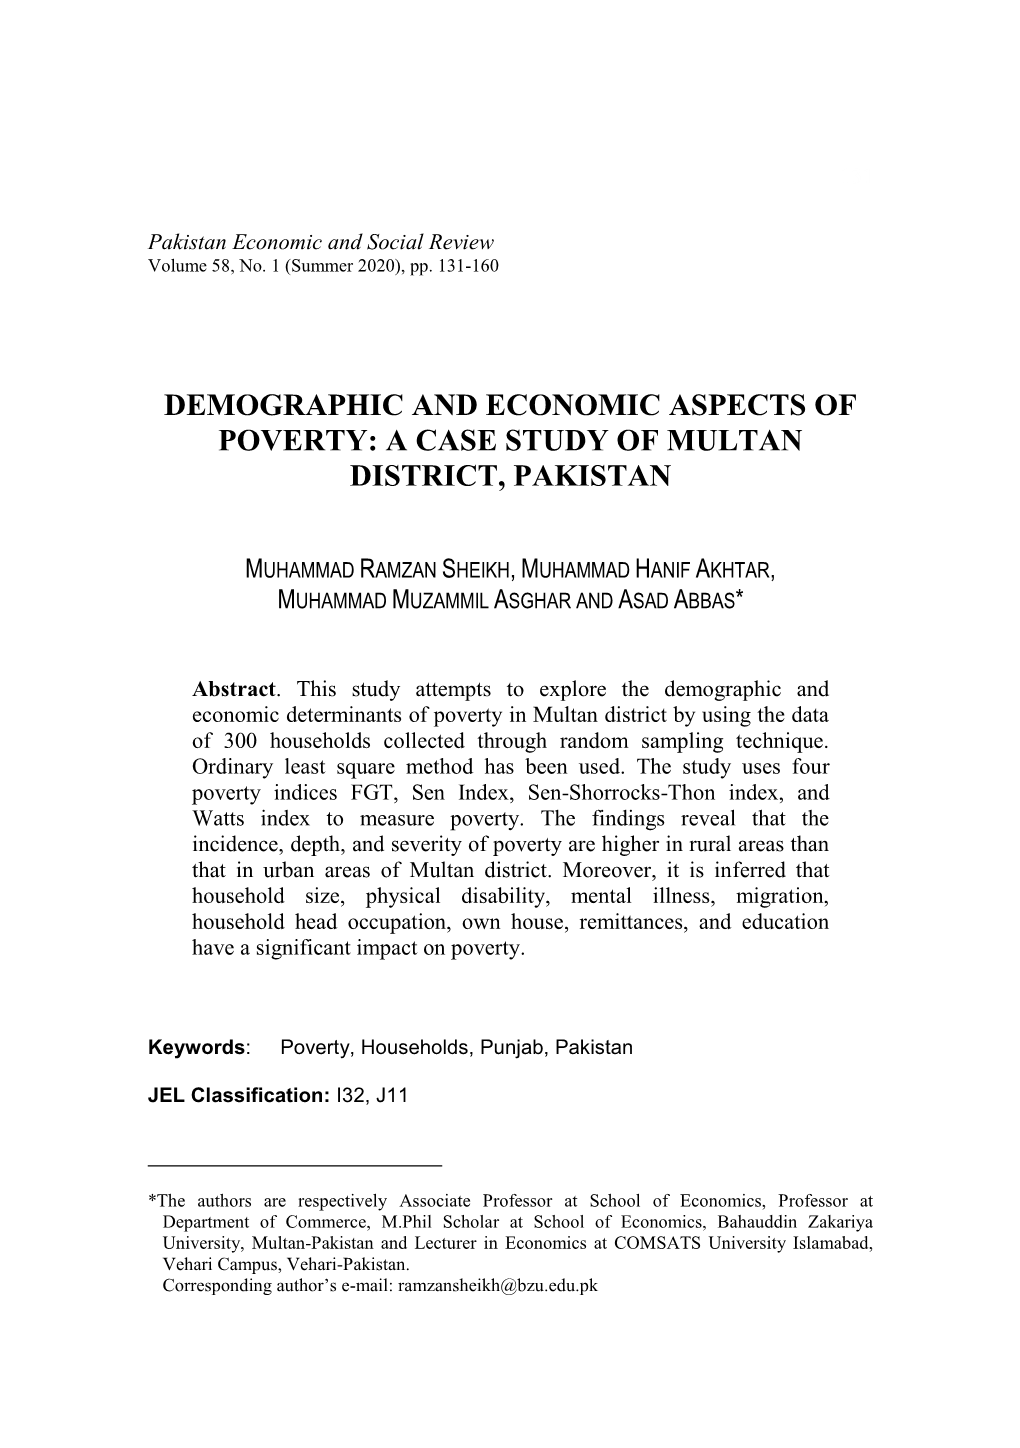 Demographic and Economic Aspects of Poverty: a Case Study of Multan District, Pakistan